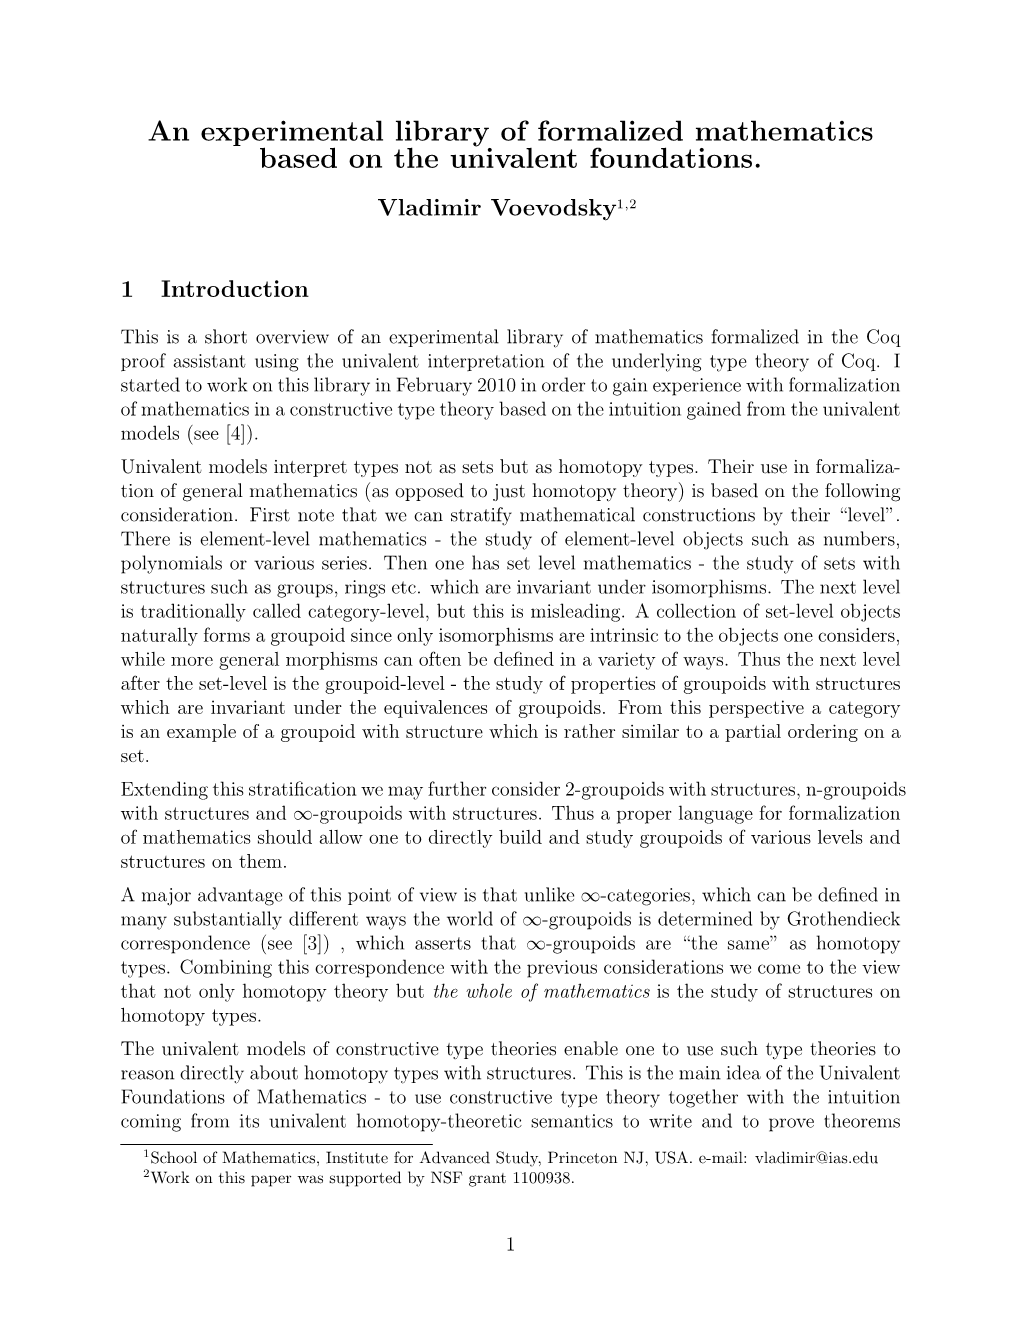 An Experimental Library of Formalized Mathematics Based on the Univalent Foundations